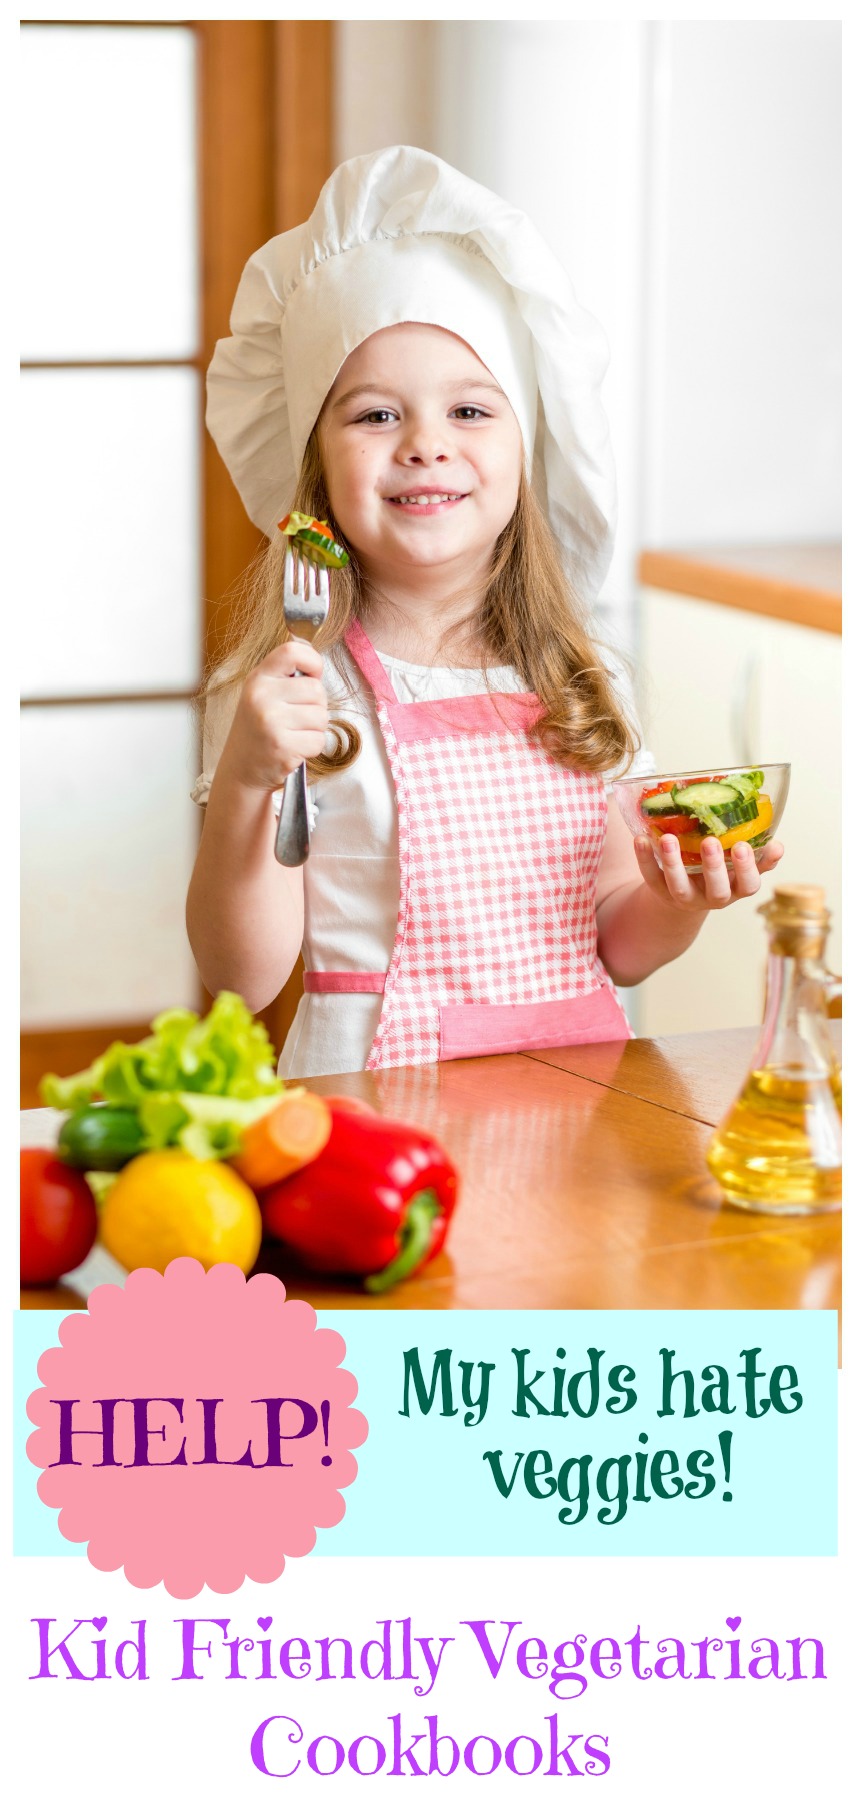 Looking for some Kid Friendly Vegetarian Cookbooks? Here are some of our favorite vegetarian cookbooks for making amazing kid friendly meals!